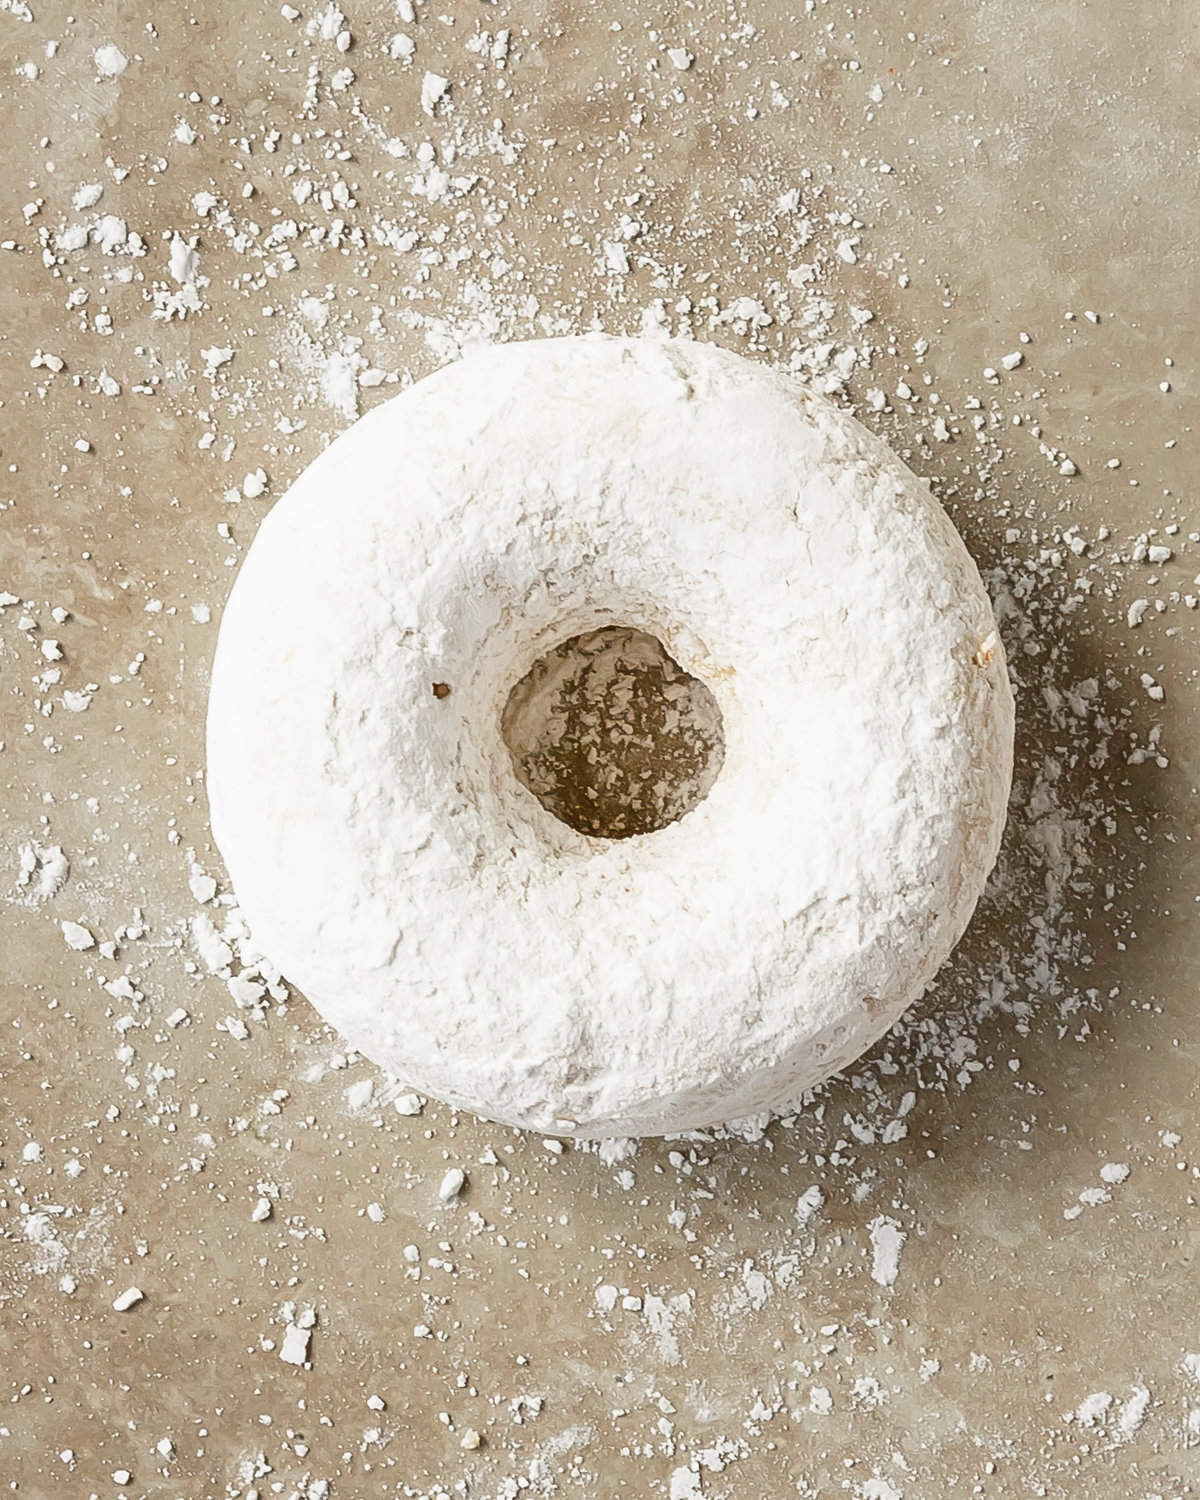 Powdered sugar donuts are soft, moist and fluffy, lightly spiced baked donuts coated in powdered sugar. These cake-style powdered donuts are quick and easy to make using two bowls, a whisk and a donut pan. If you can make muffins, you can make these cozy powder sugar donuts. 